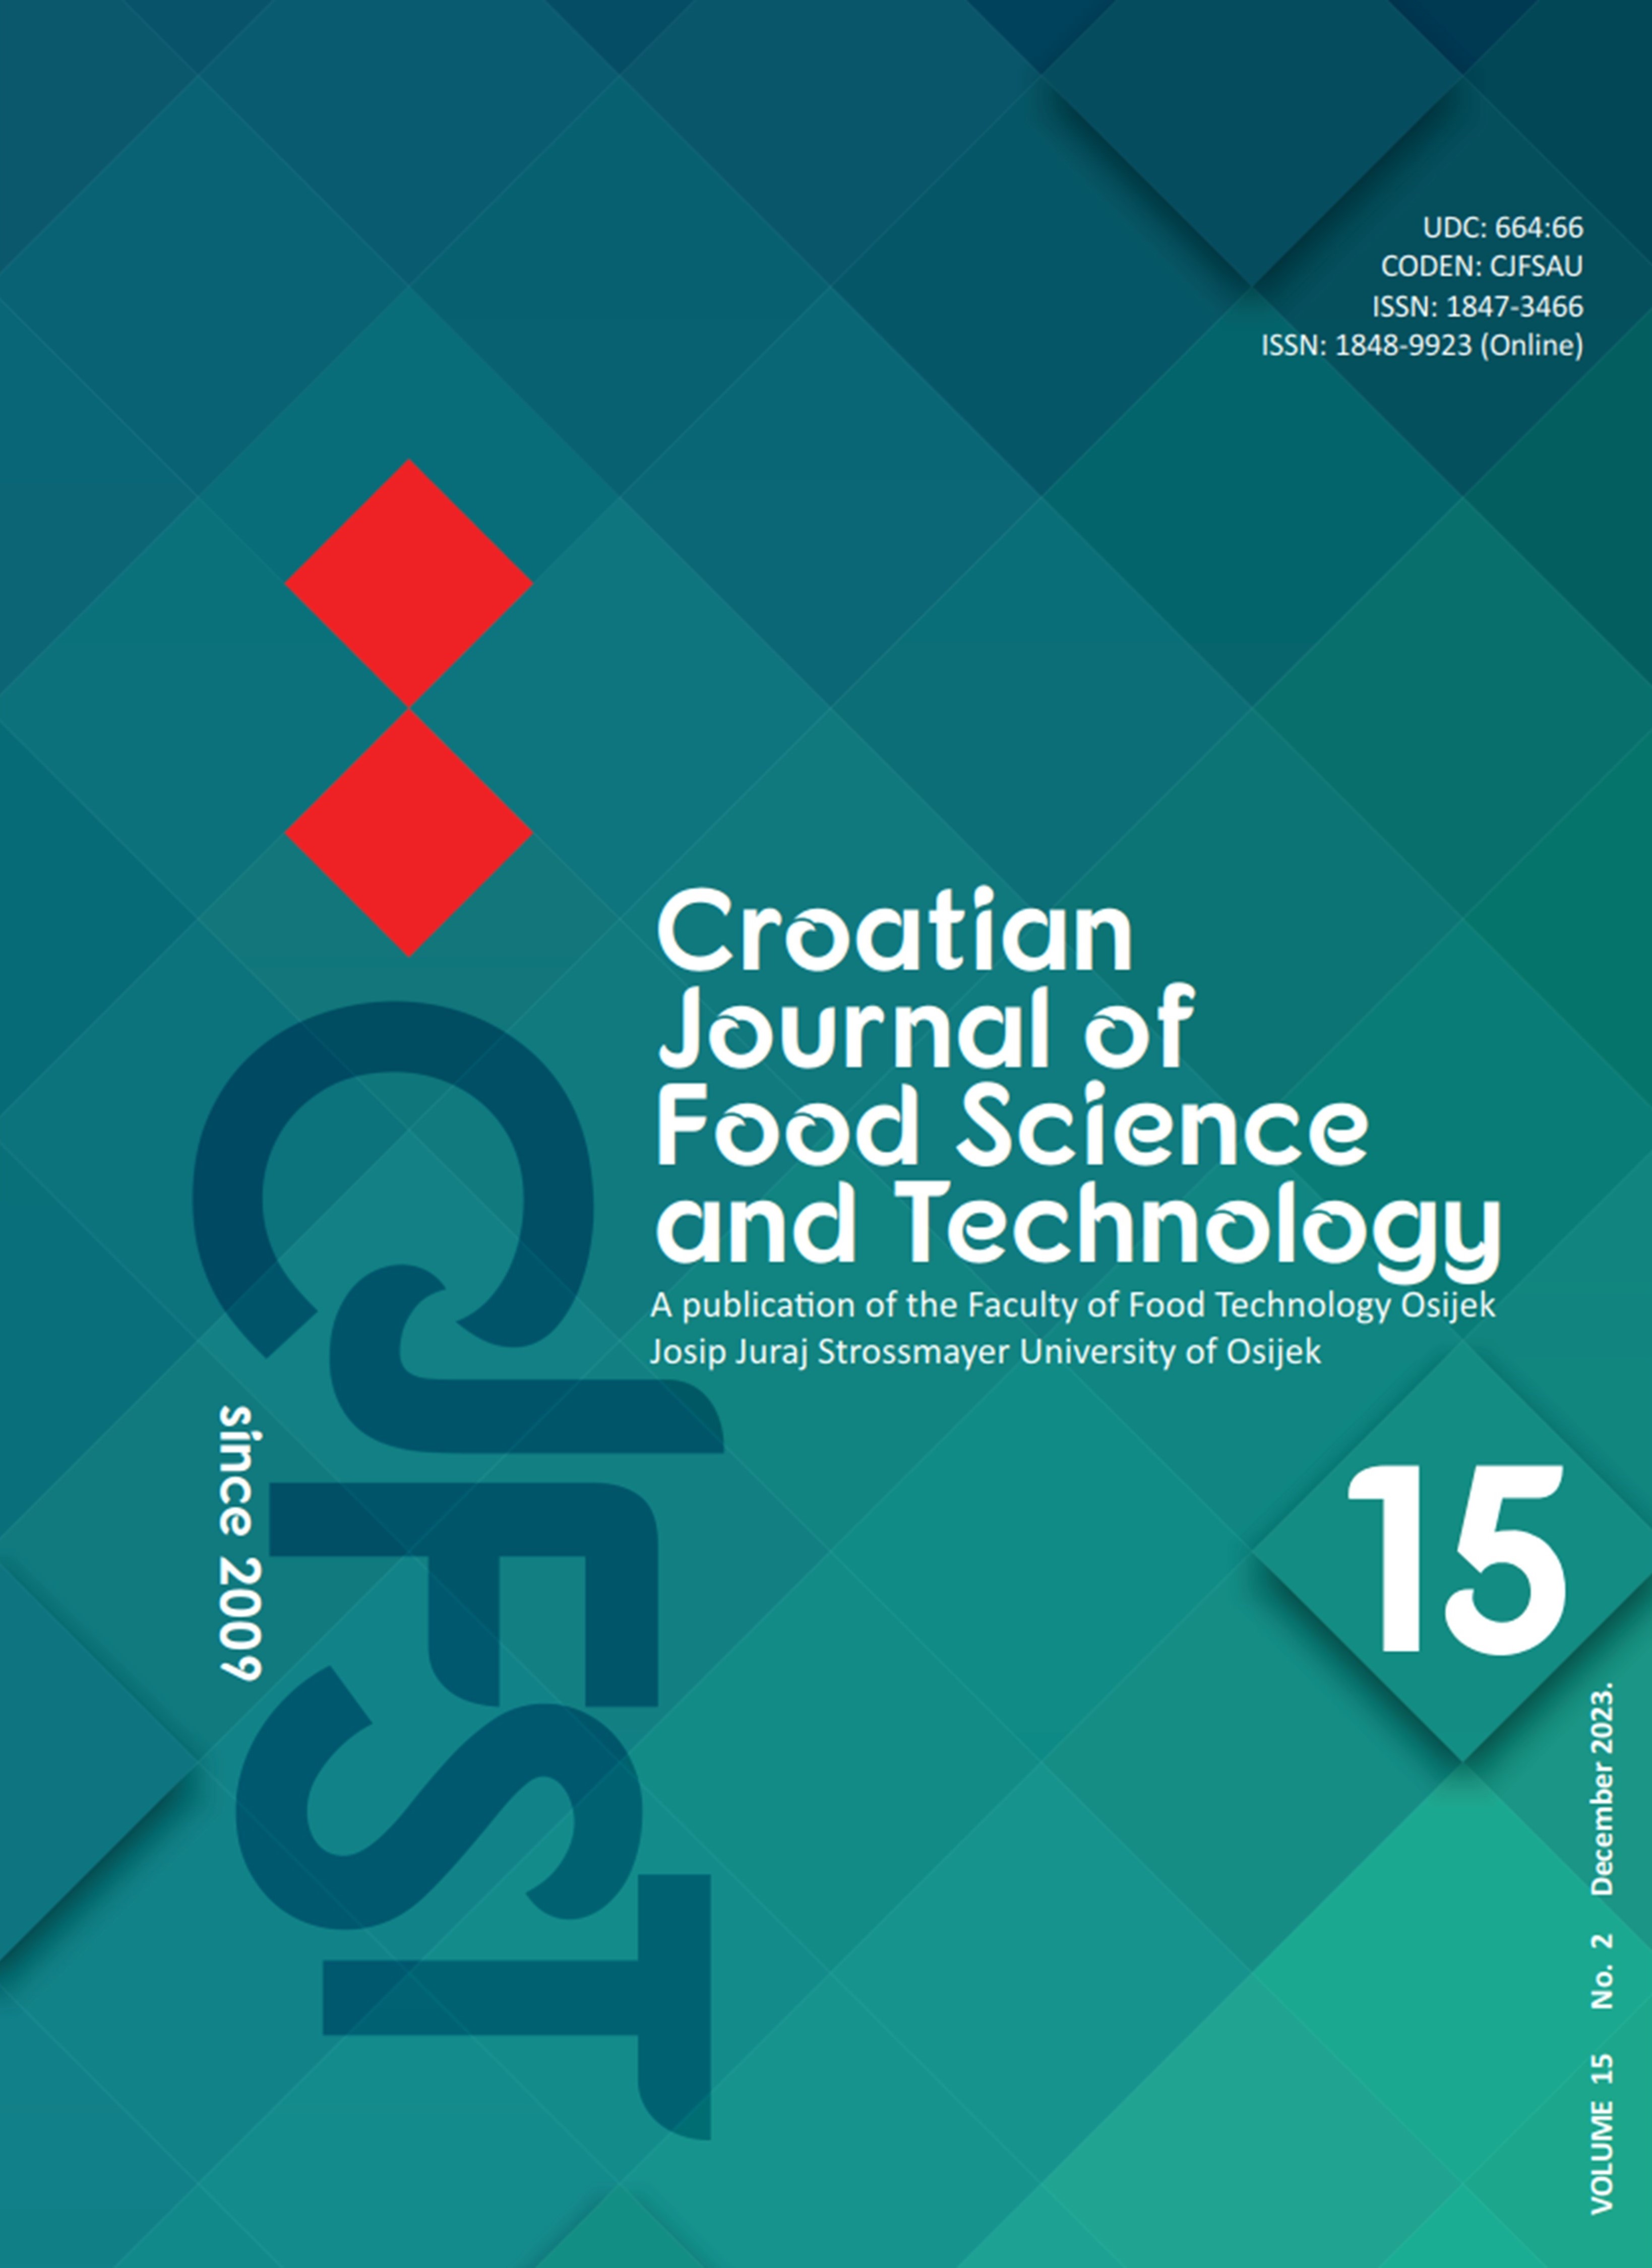 logo Croatian journal of food science and technology